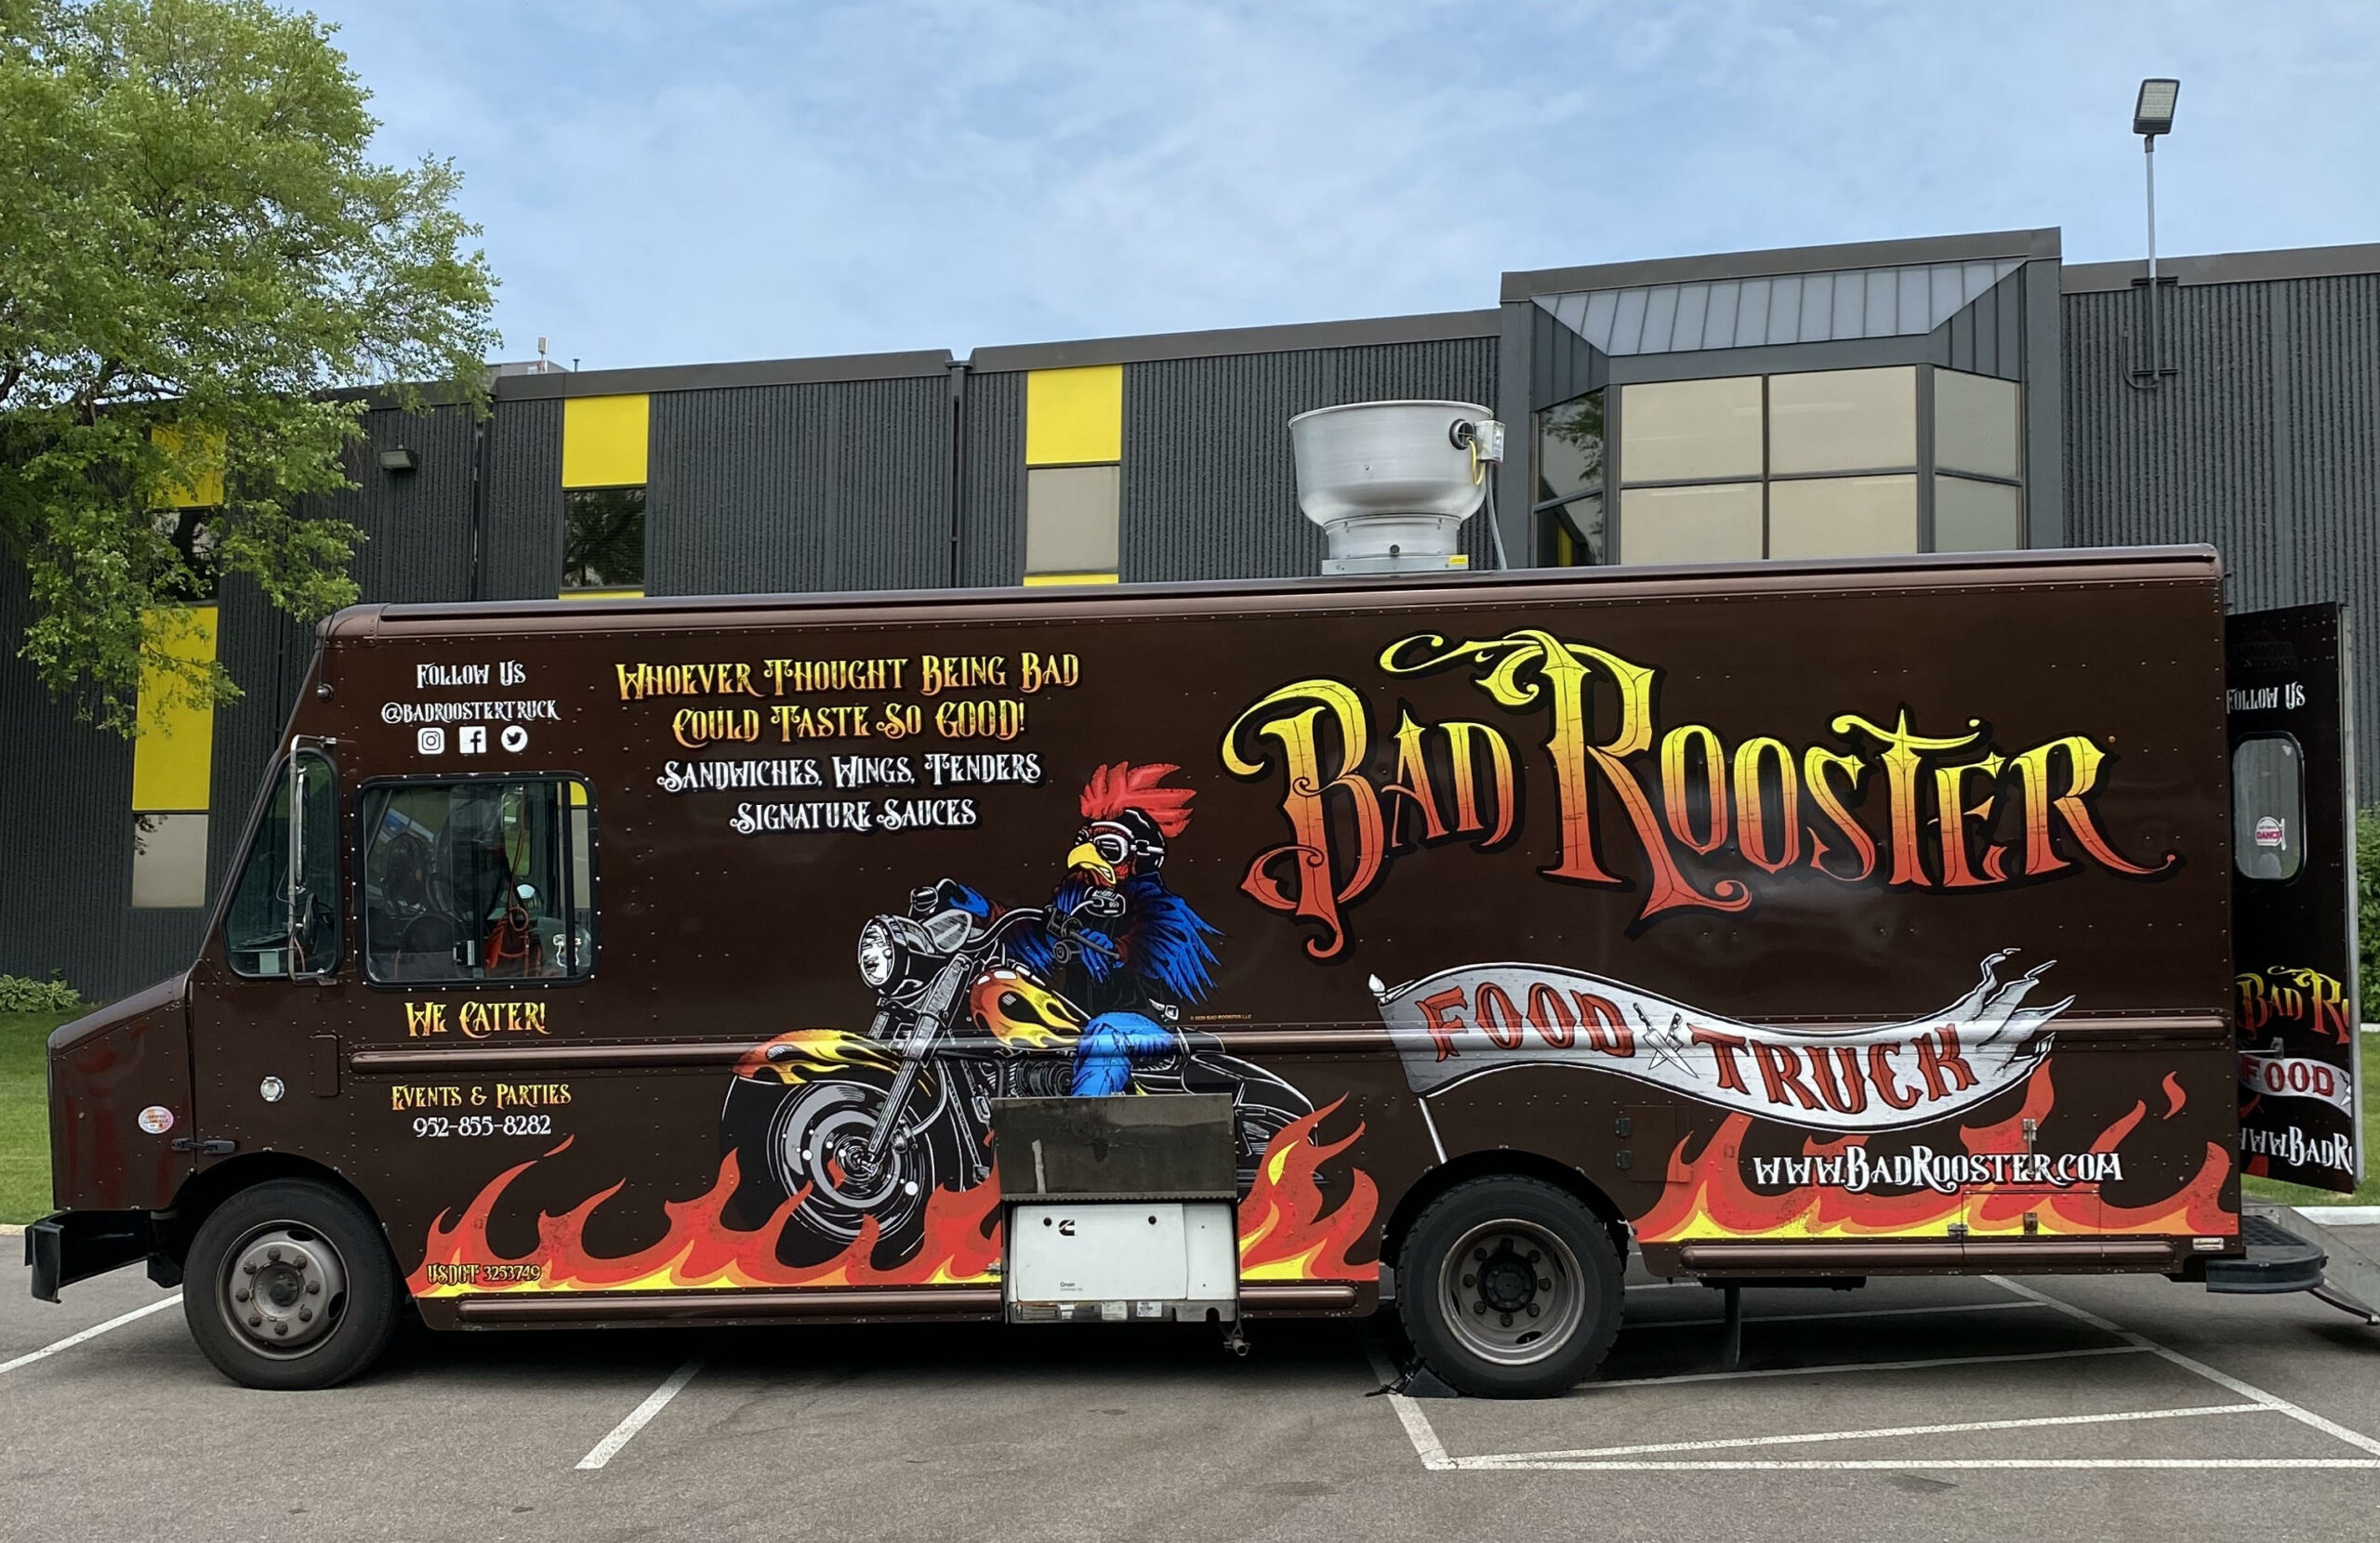 food truck with image rooster on motorcycle parked outside a gray building